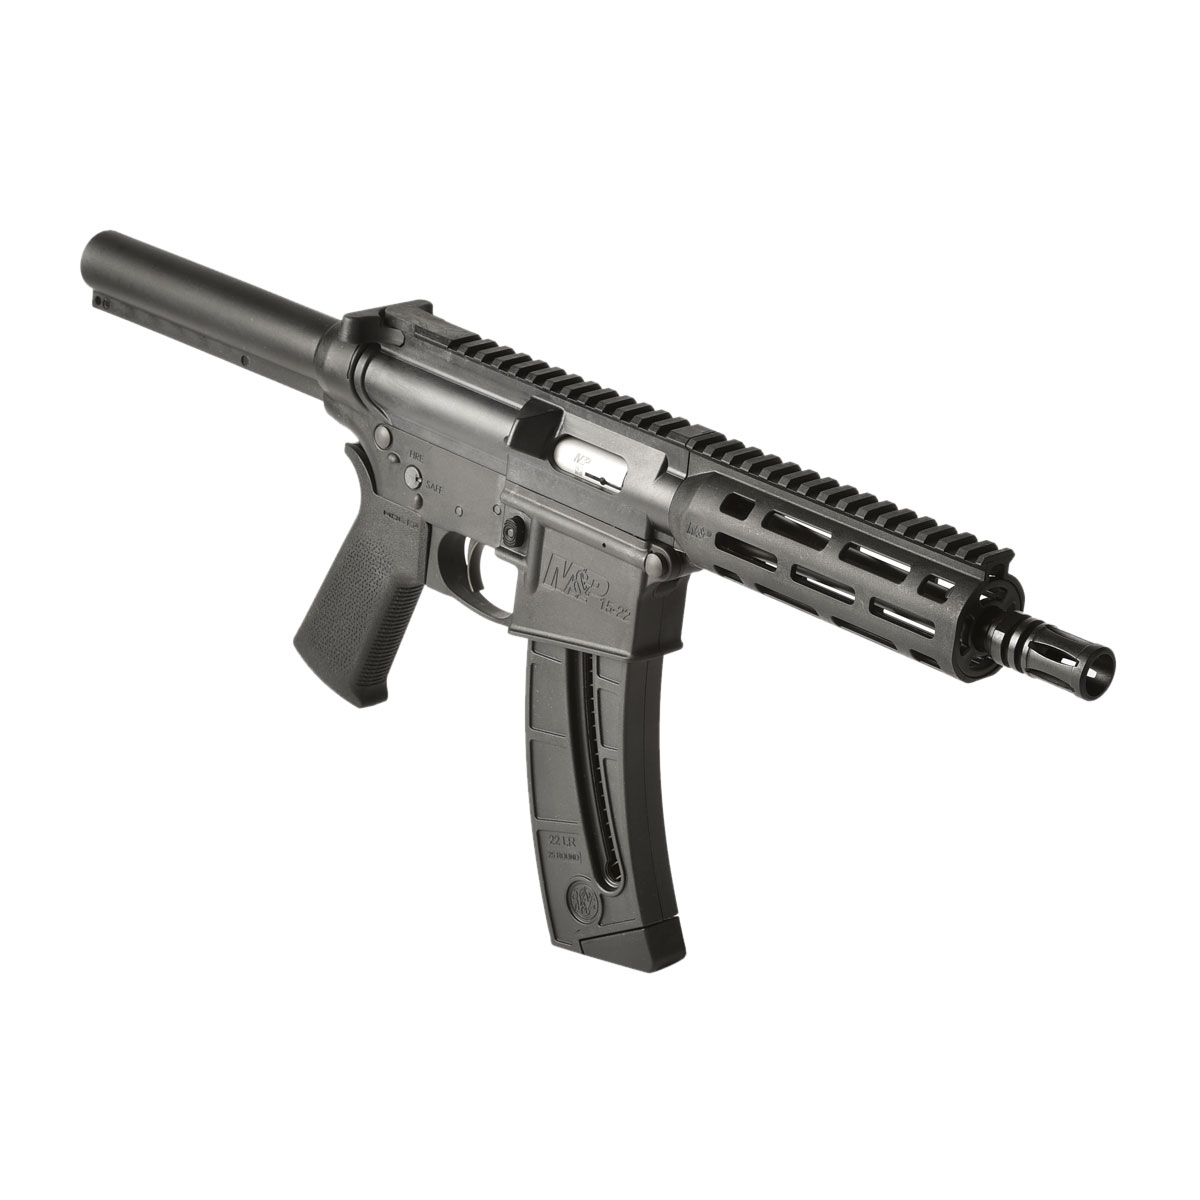 Deluxe Arms Webinars Smith & Wesson M&P15-22 Pistol